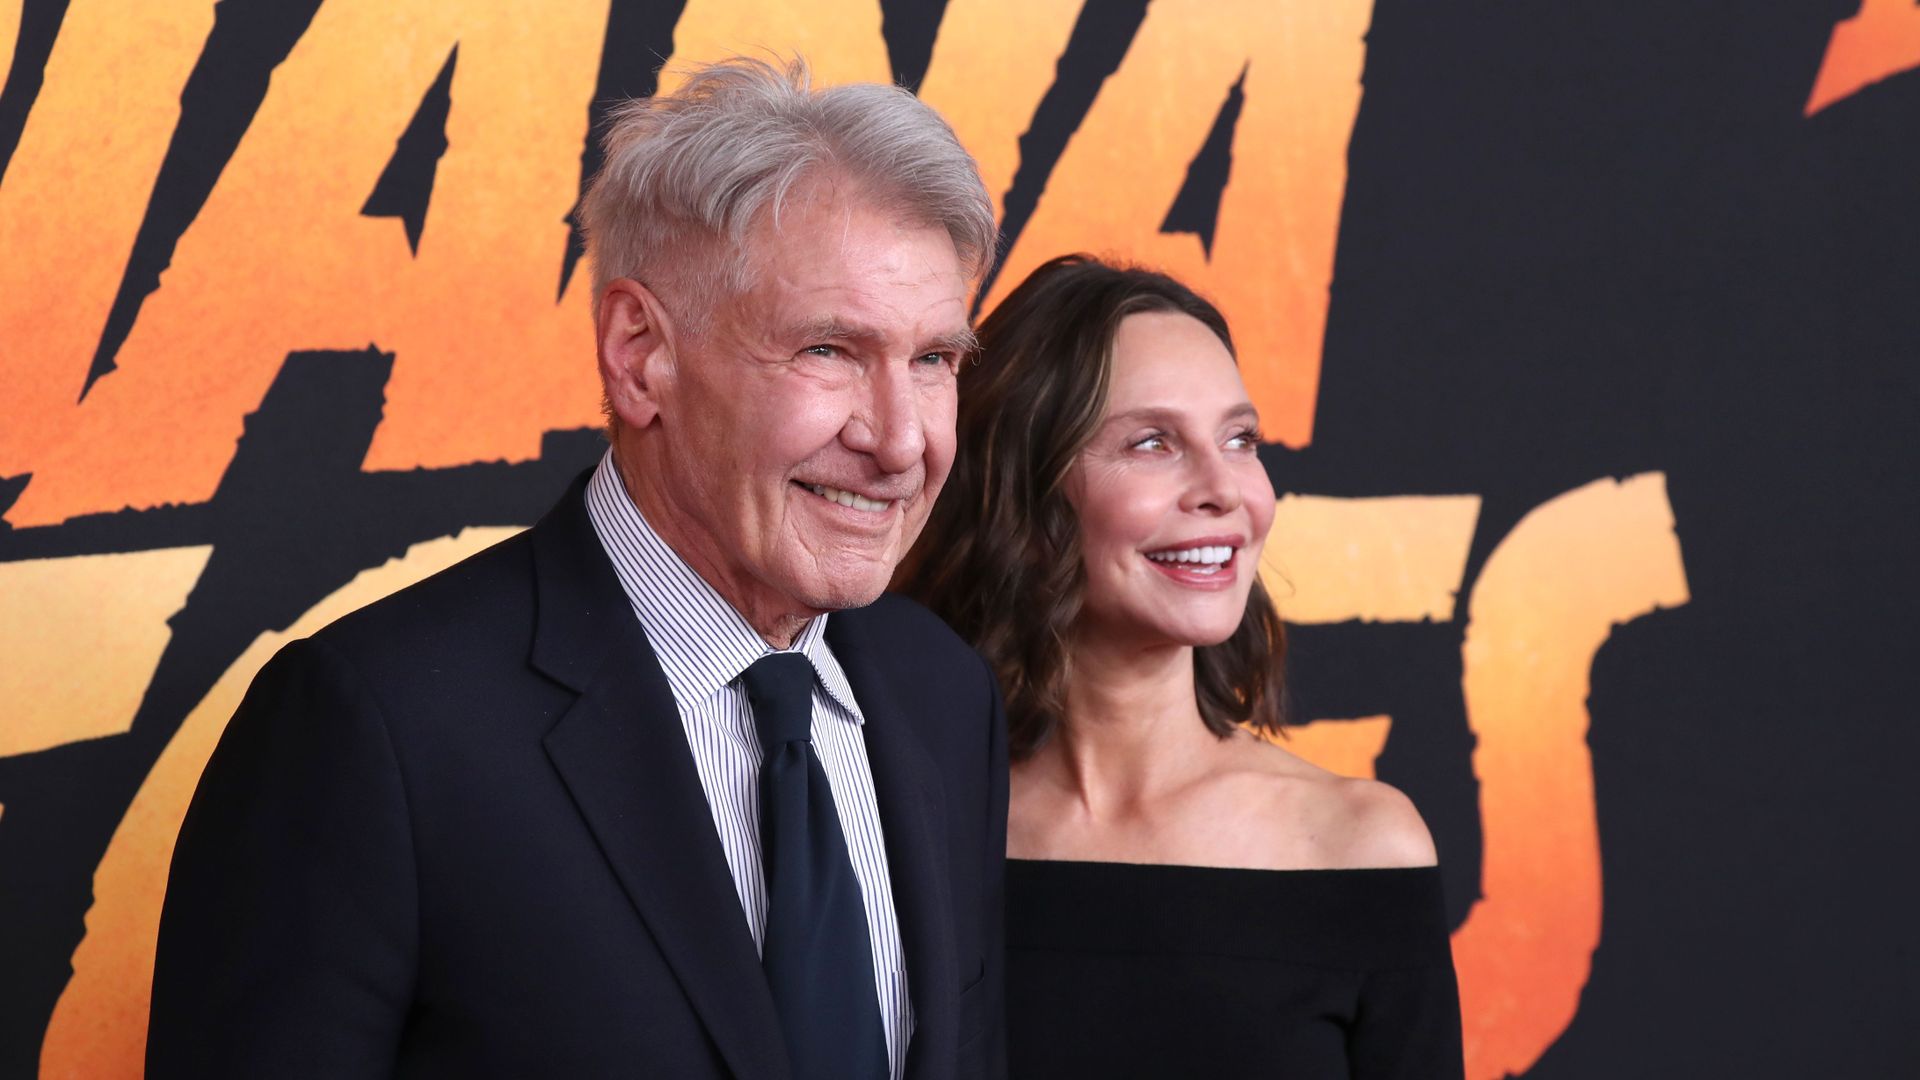 Harrison Ford, 80, steals the show on the red carpet as he steps out with wife Calista Flockhart